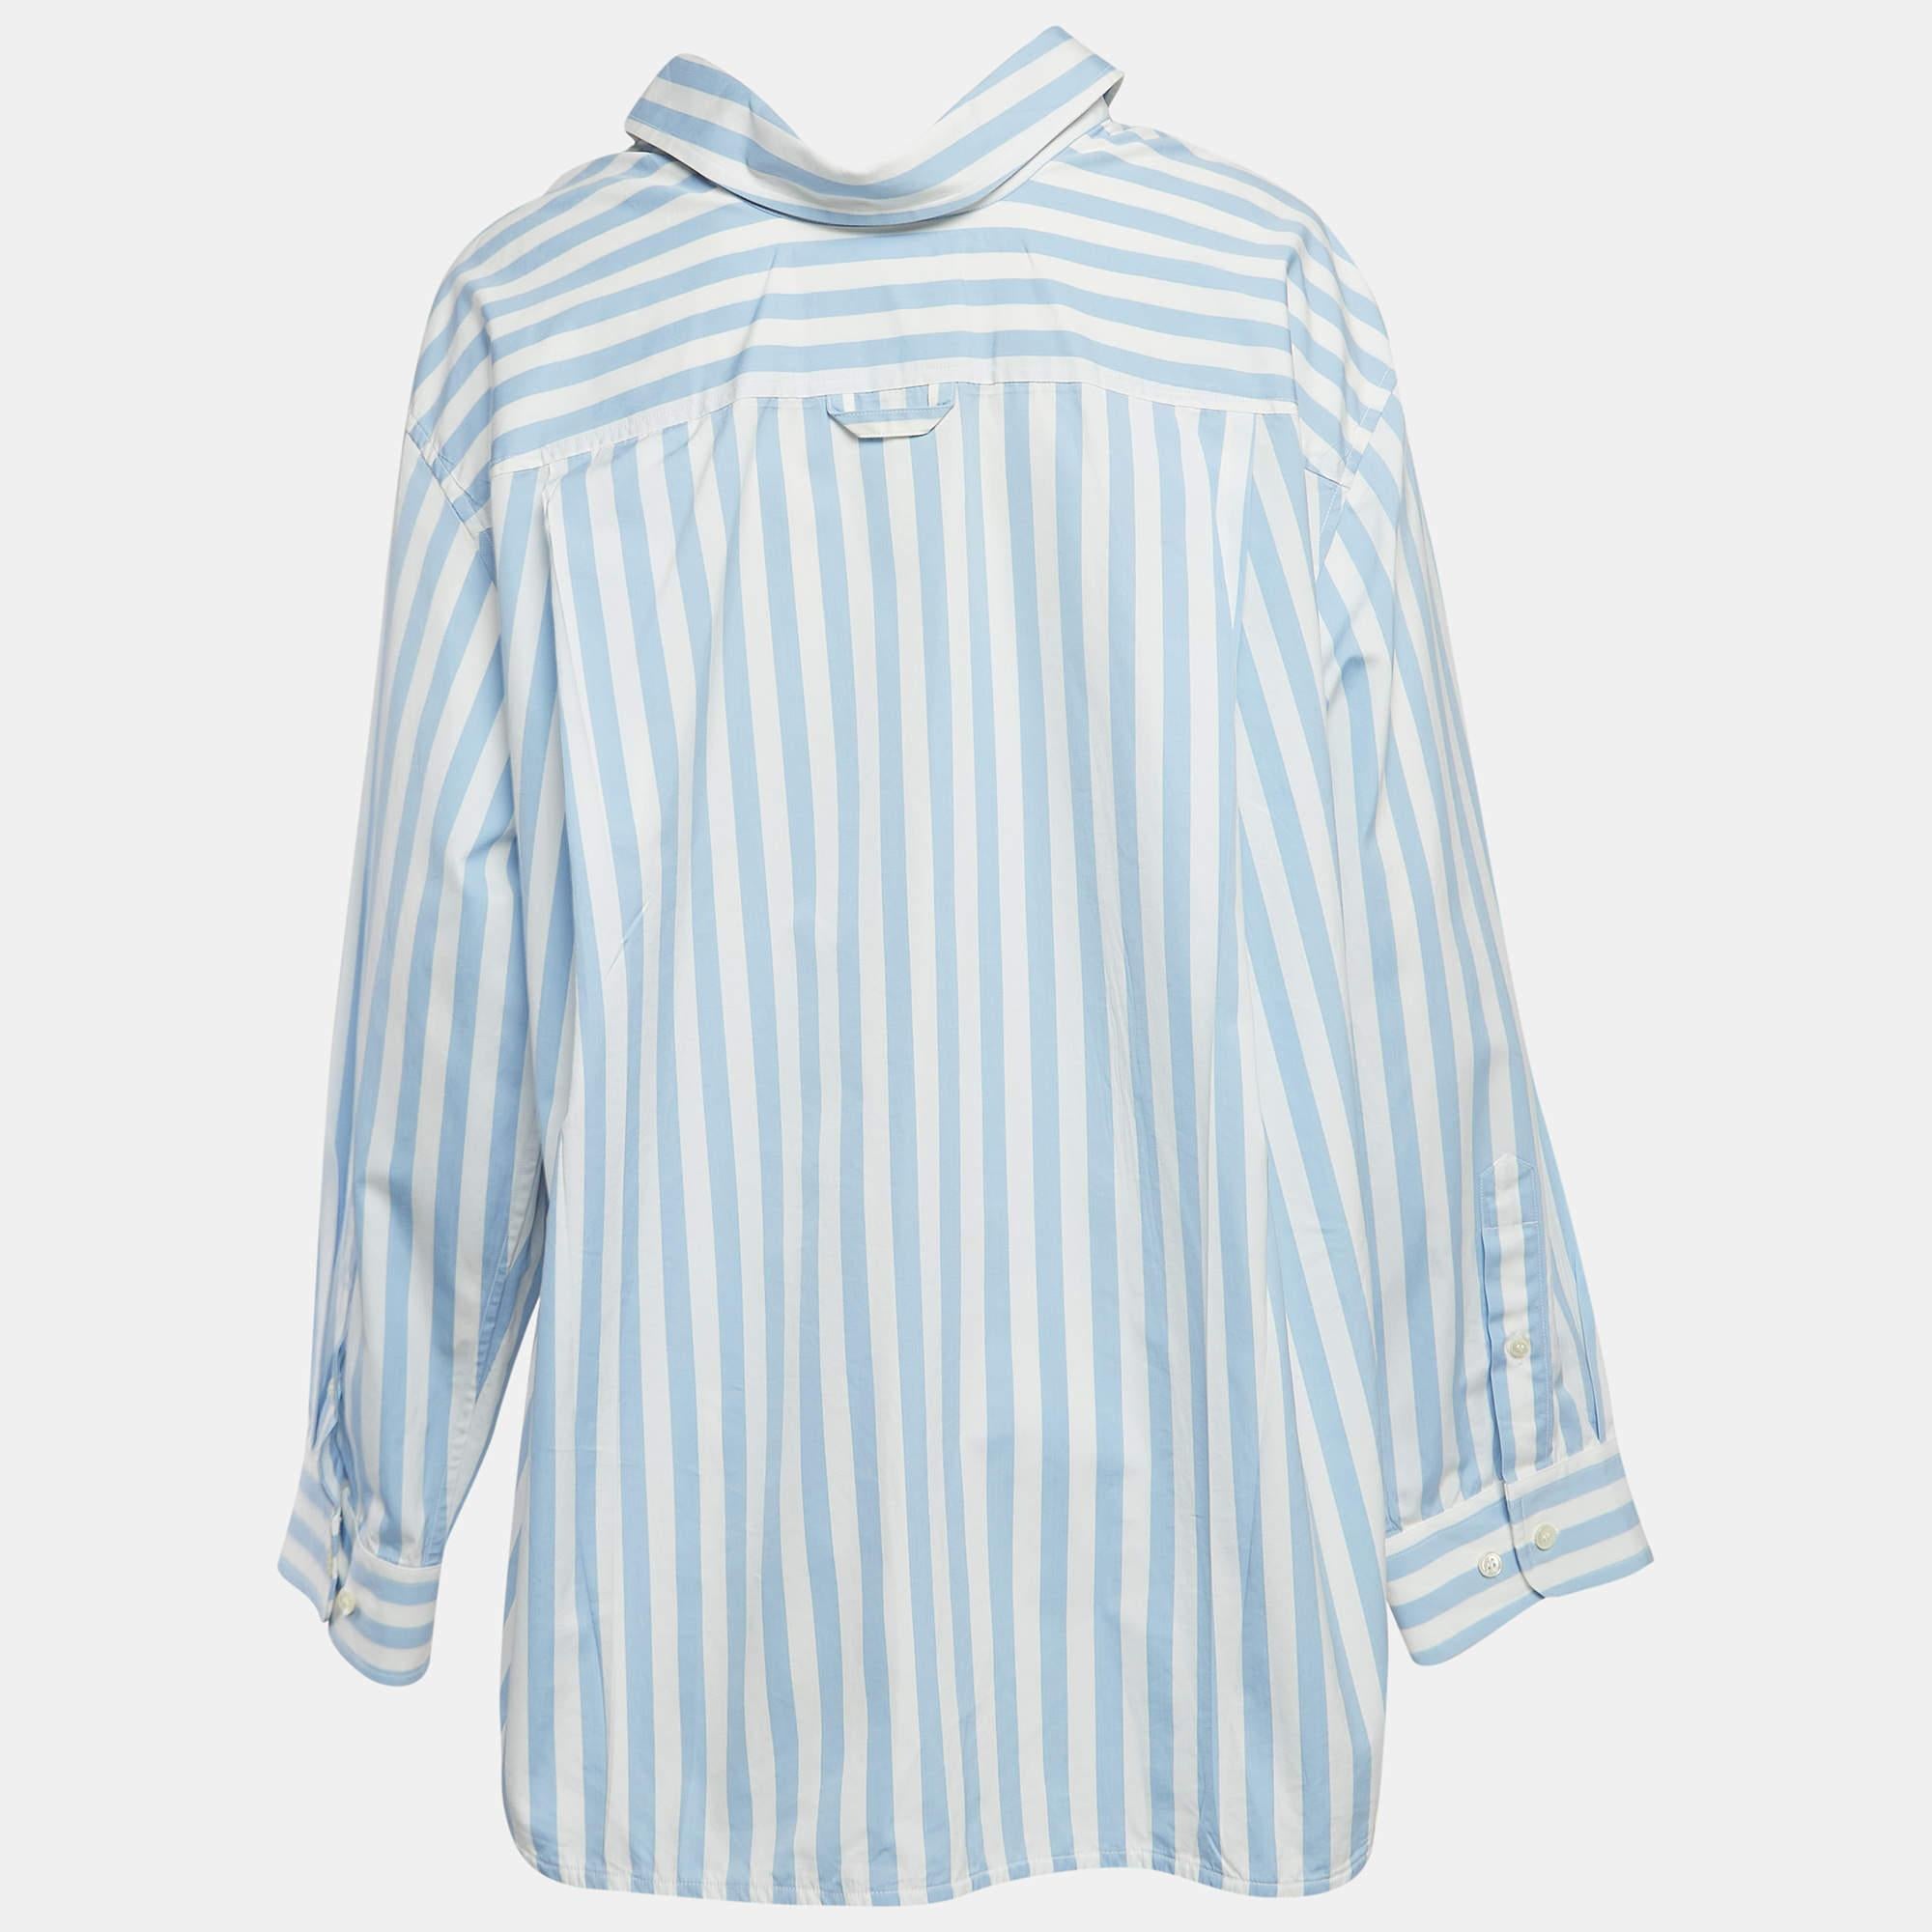 Indulge in effortless sophistication with the Balenciaga shirt. Crafted with premium cotton, its oversized silhouette exudes contemporary charm. The striking blue and white stripes add a touch of timeless elegance, making it a versatile wardrobe